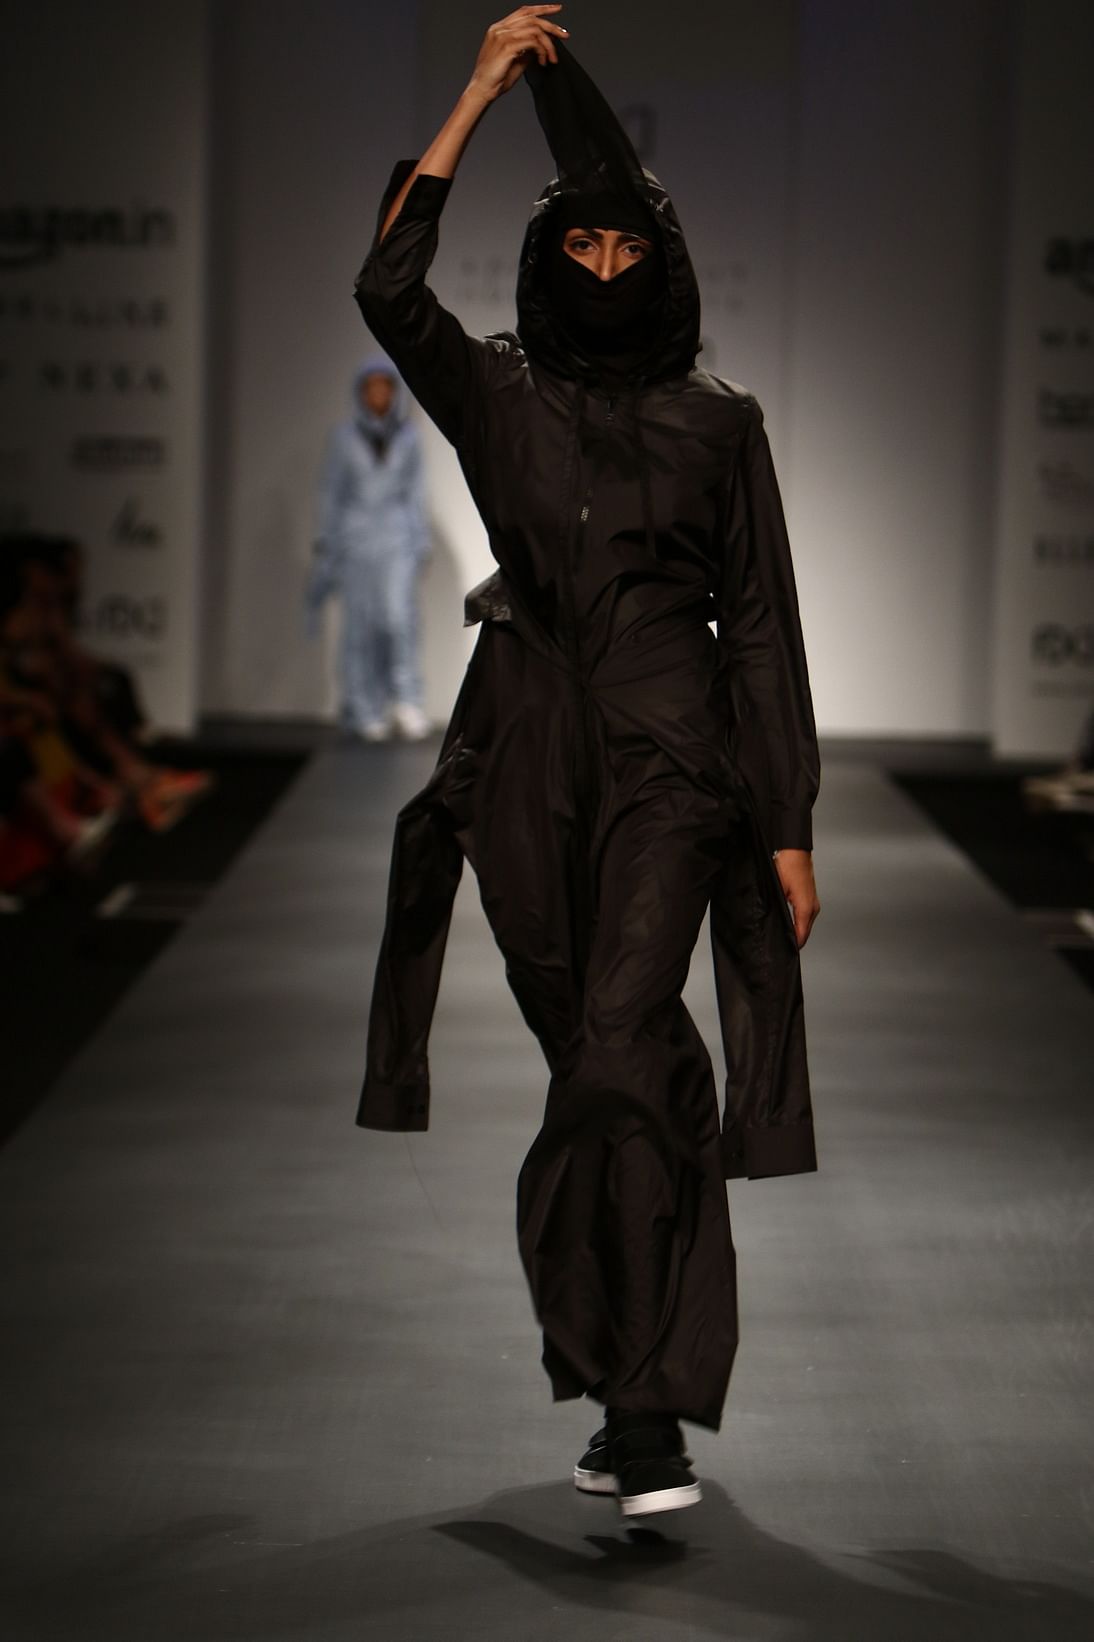 

Showcasing exaggerated long sleeves and gender neutral clothing, the collection paid a “tribute to the individual”